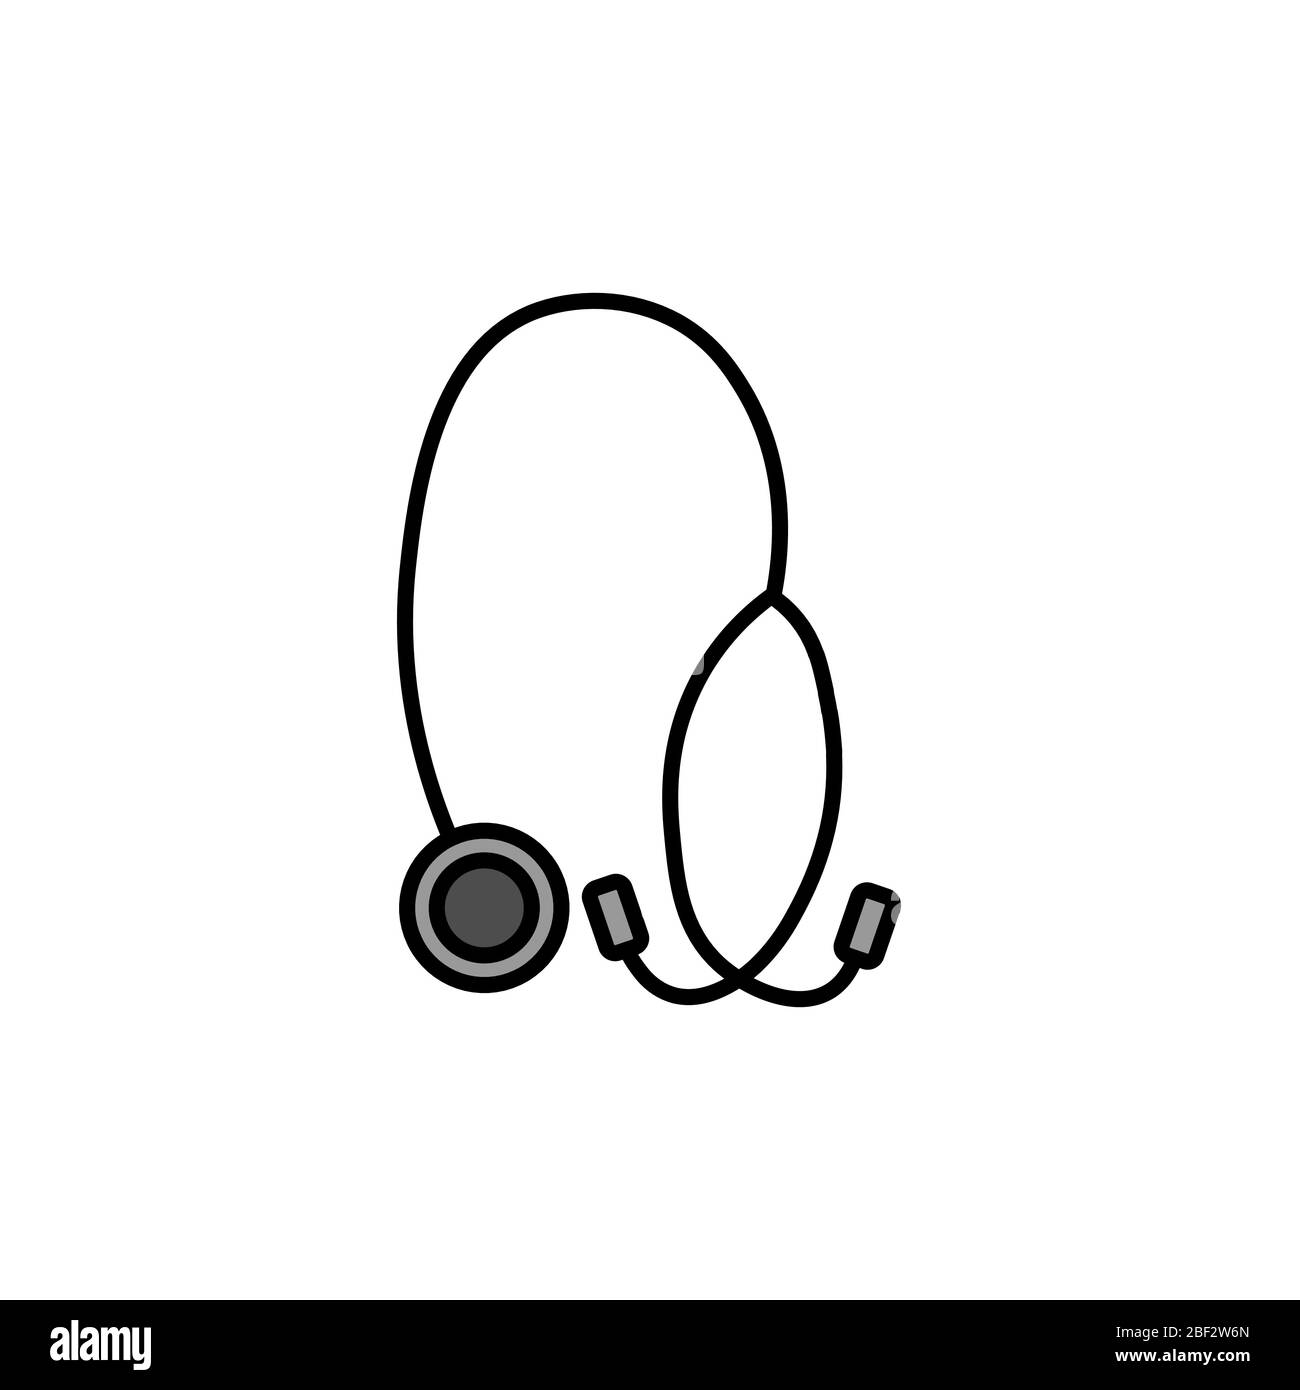 Medical equipment stethoscope. Black and grey outline on white background. Flat style vector illustration can be used in greeting cards, posters, flyers, banners, promotions, invitations etc. EPS10 Stock Vector